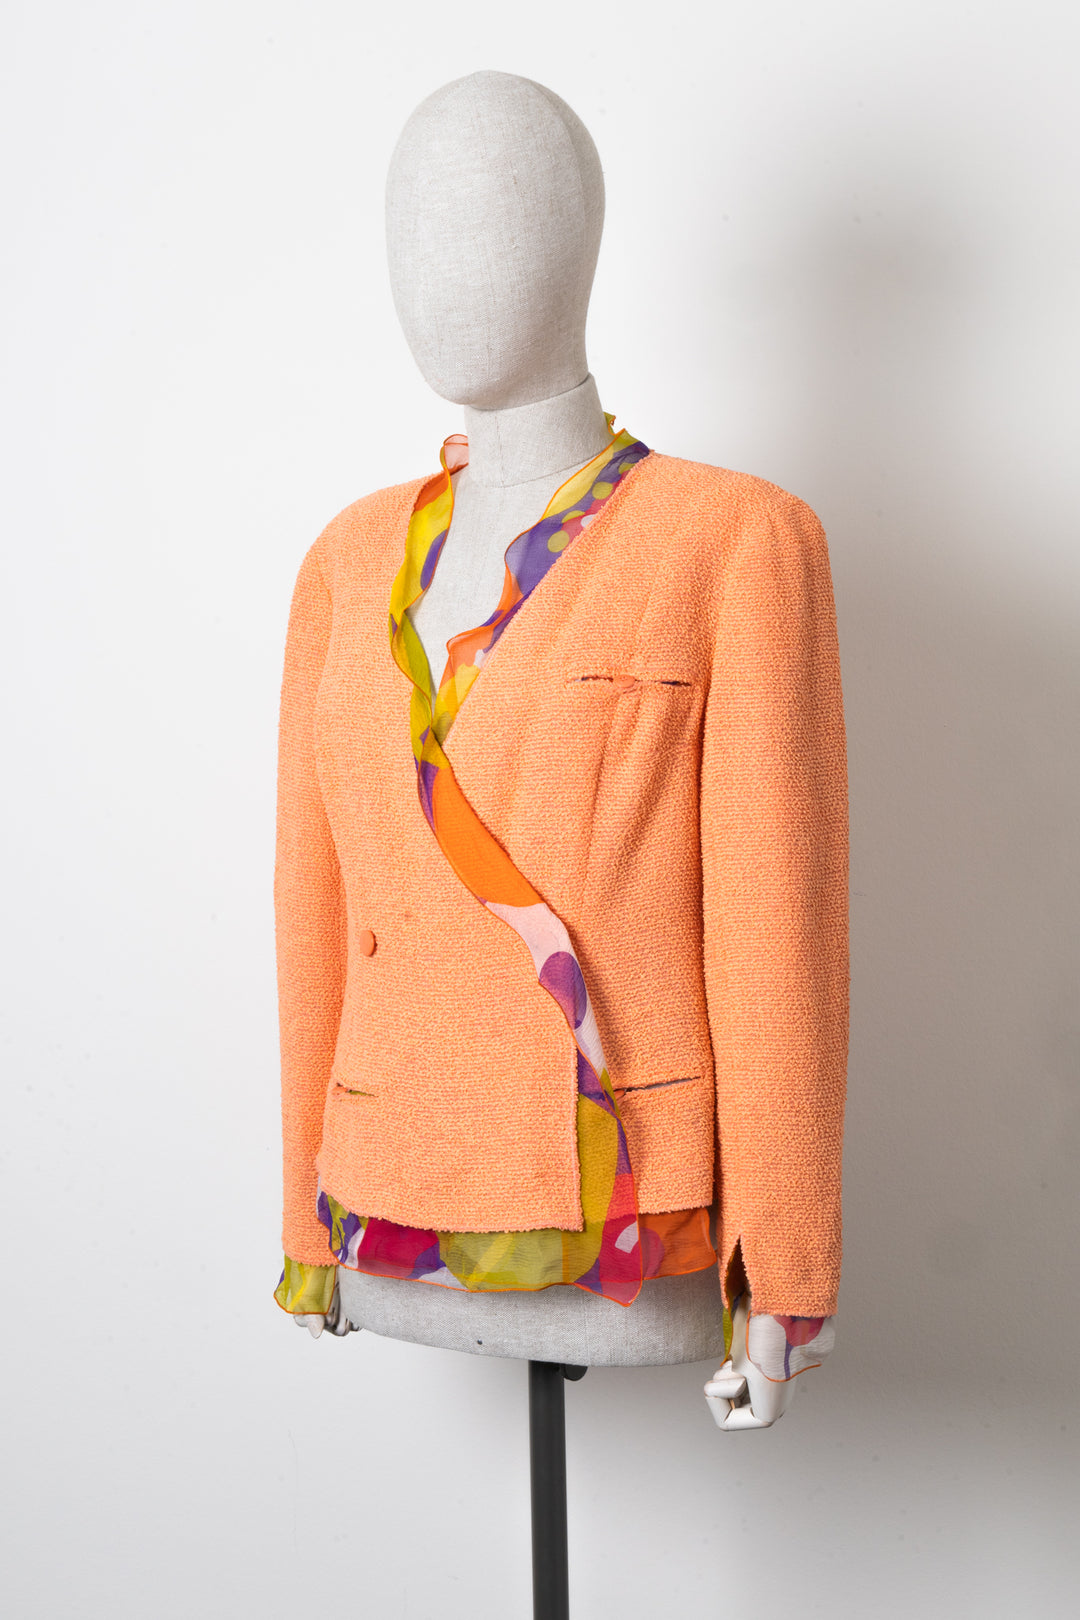 CHANEL Jacket Tweed Salmon with Silk Lining 01P